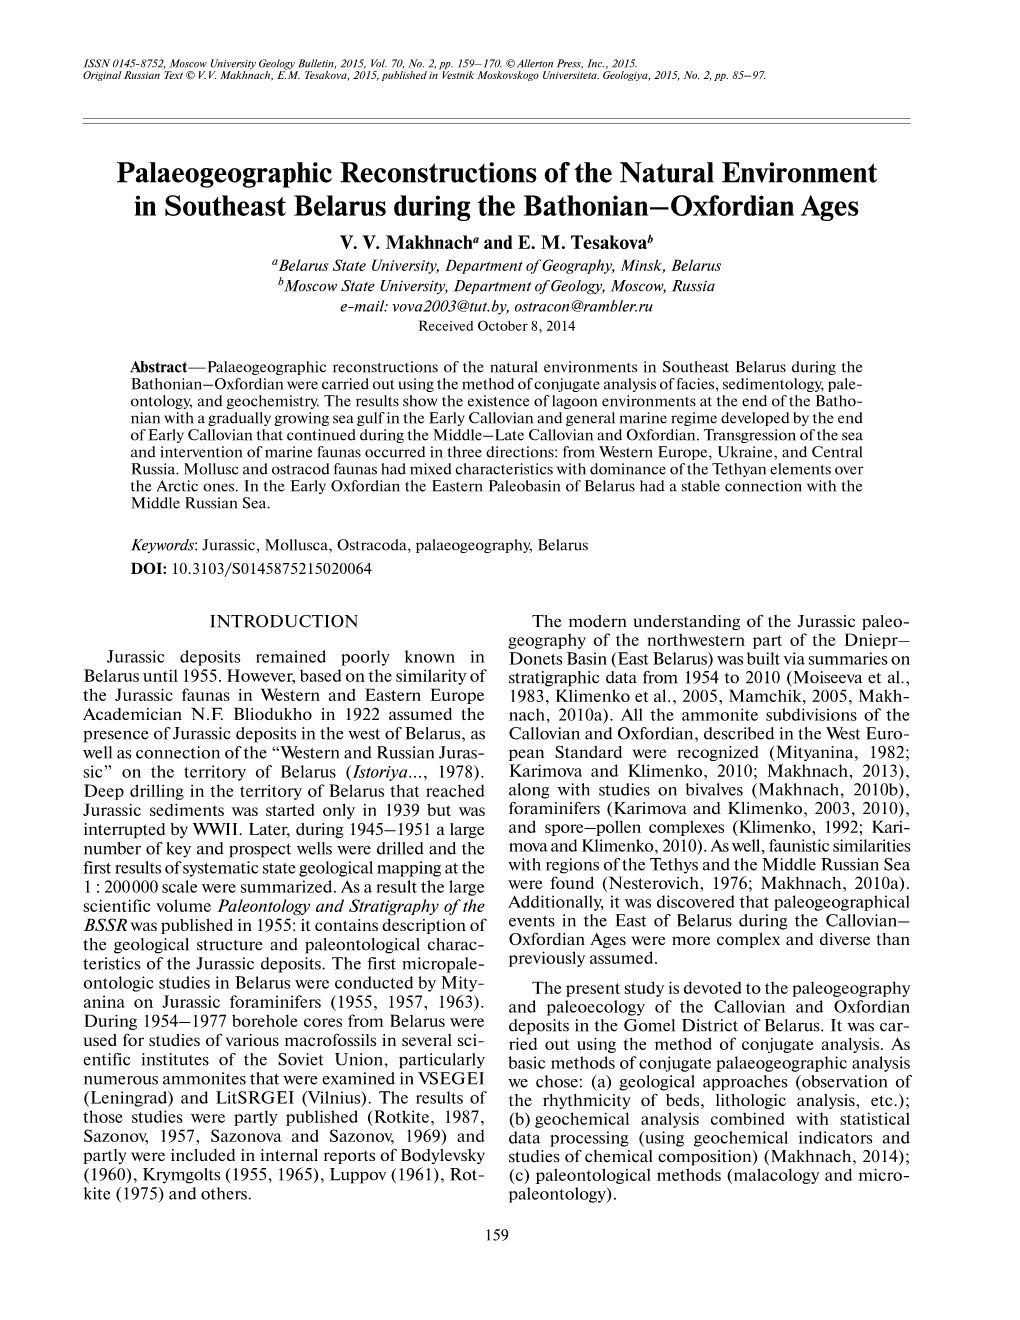 Palaeogeographic Reconstructions of the Natural Environment in Southeast Belarus During the Bathonian–Oxfordian Ages V